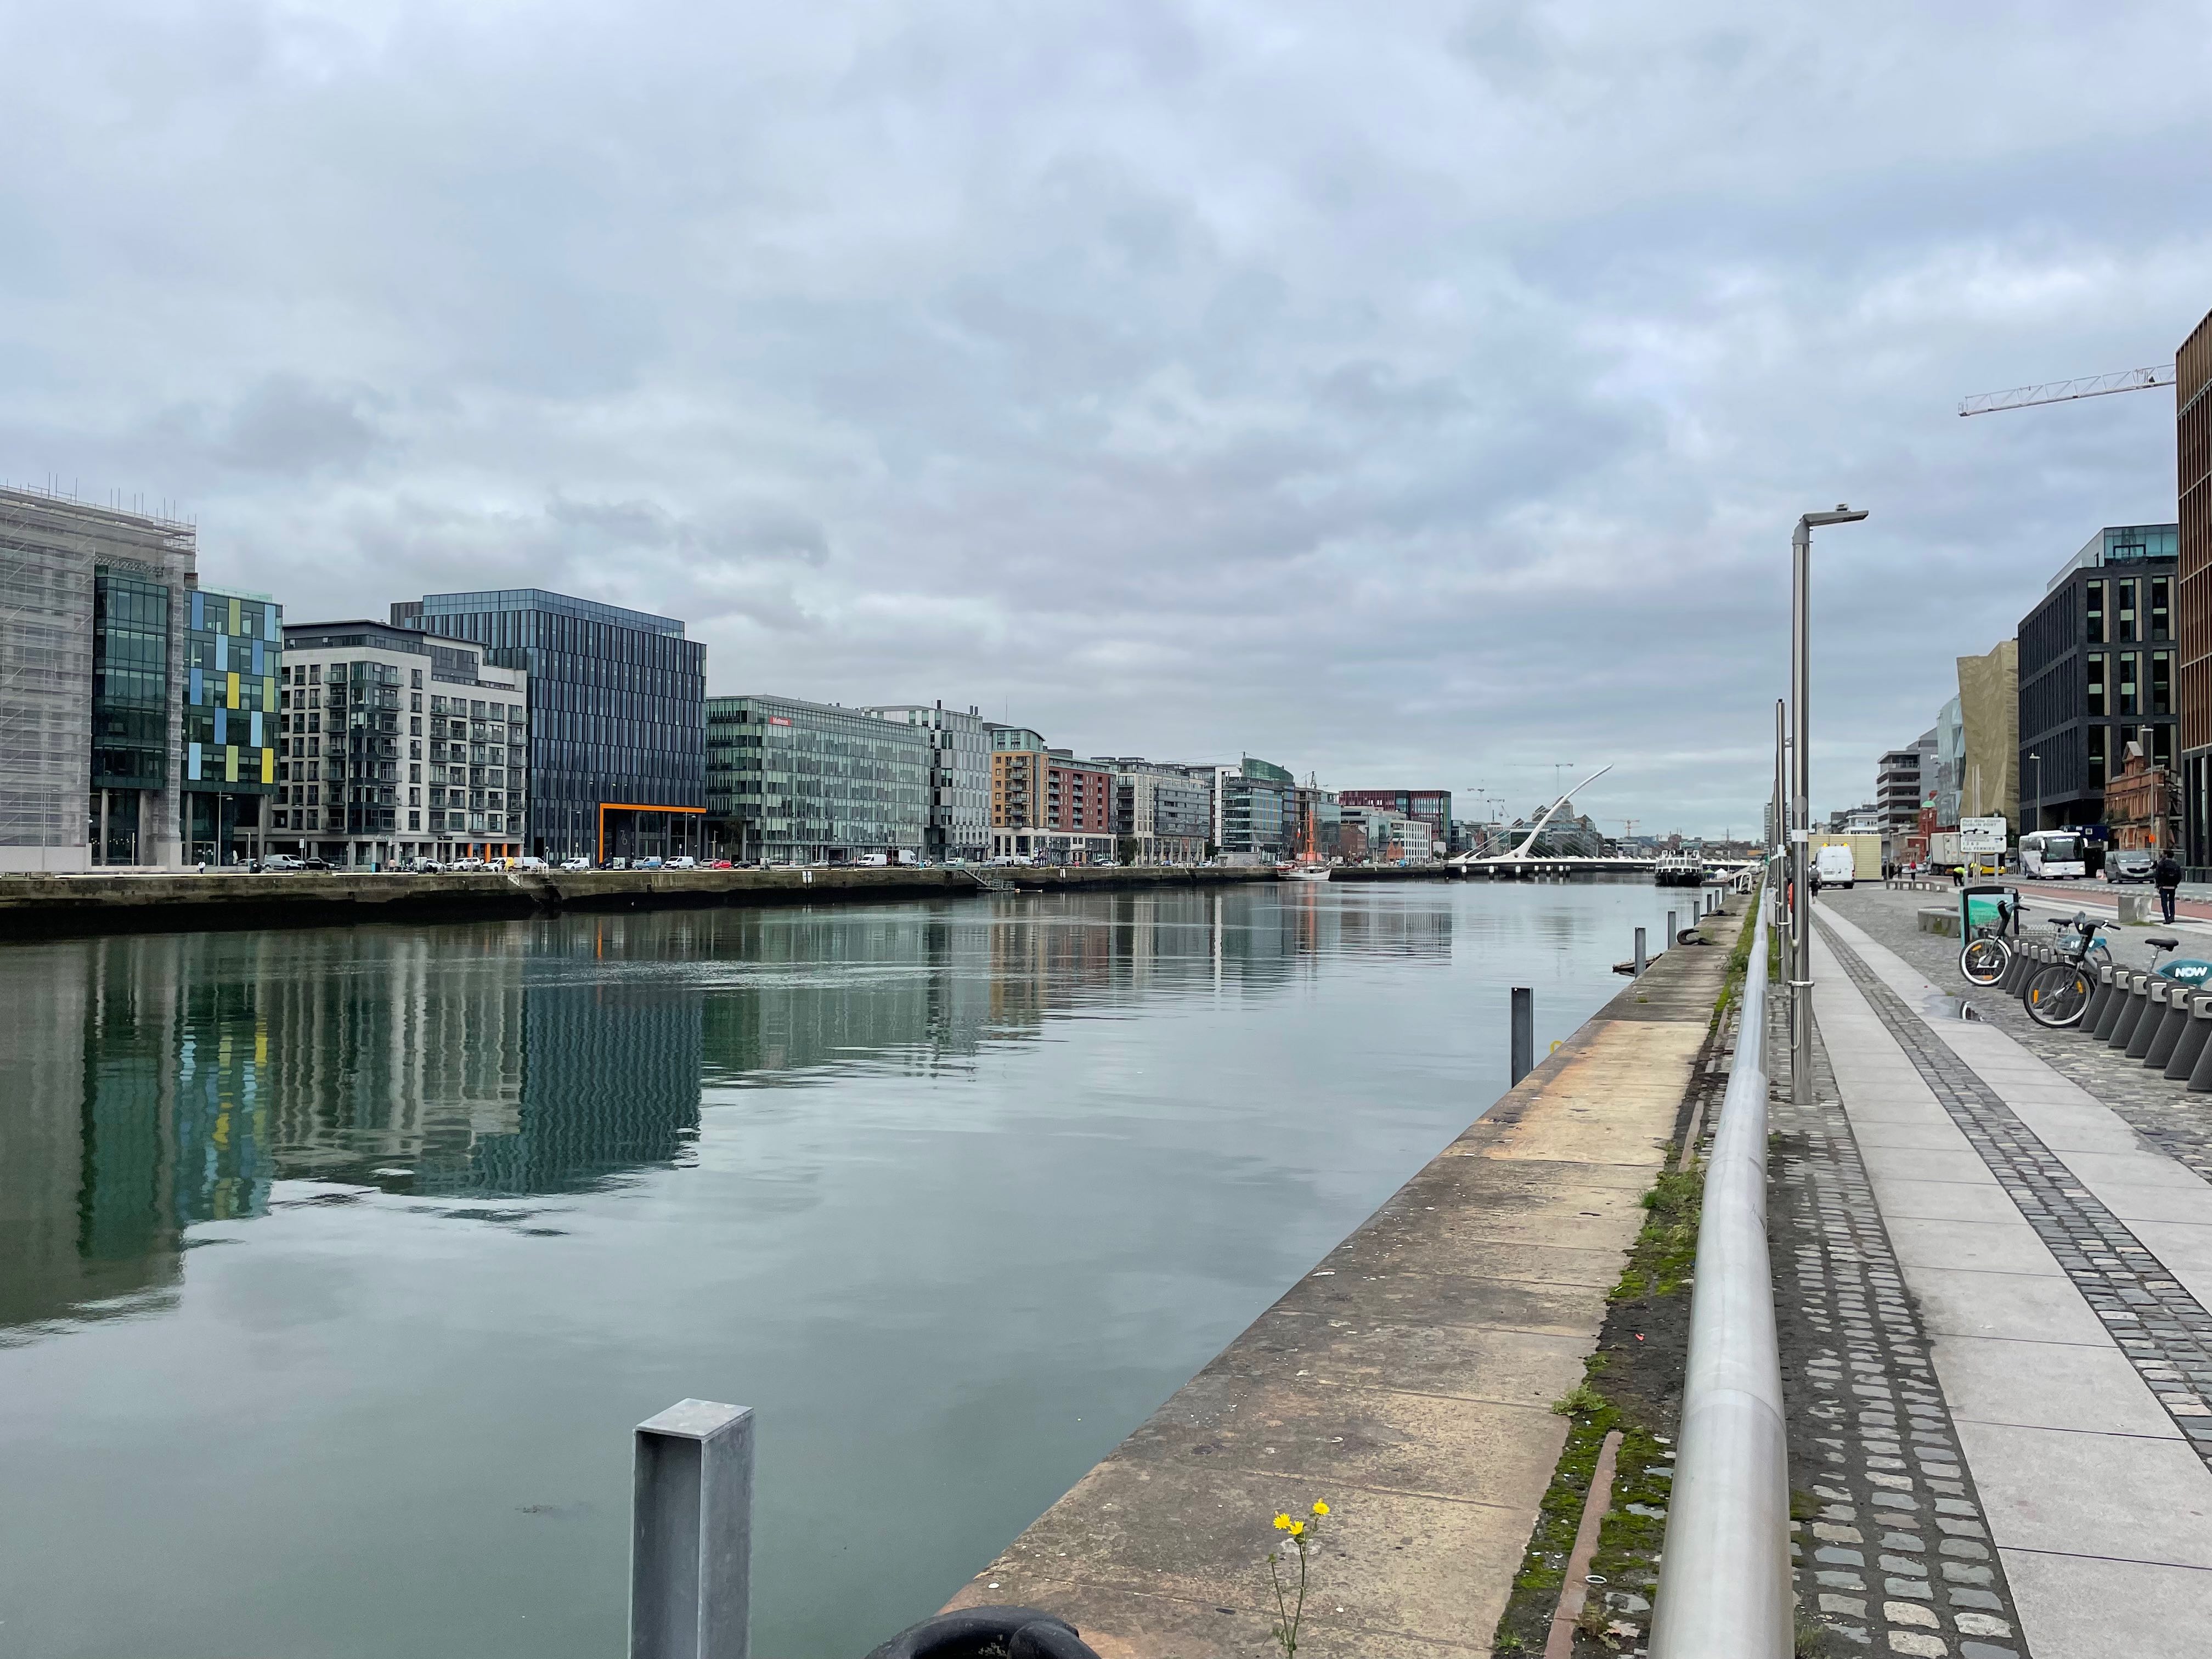 ==Image of the view on the Liffey river==